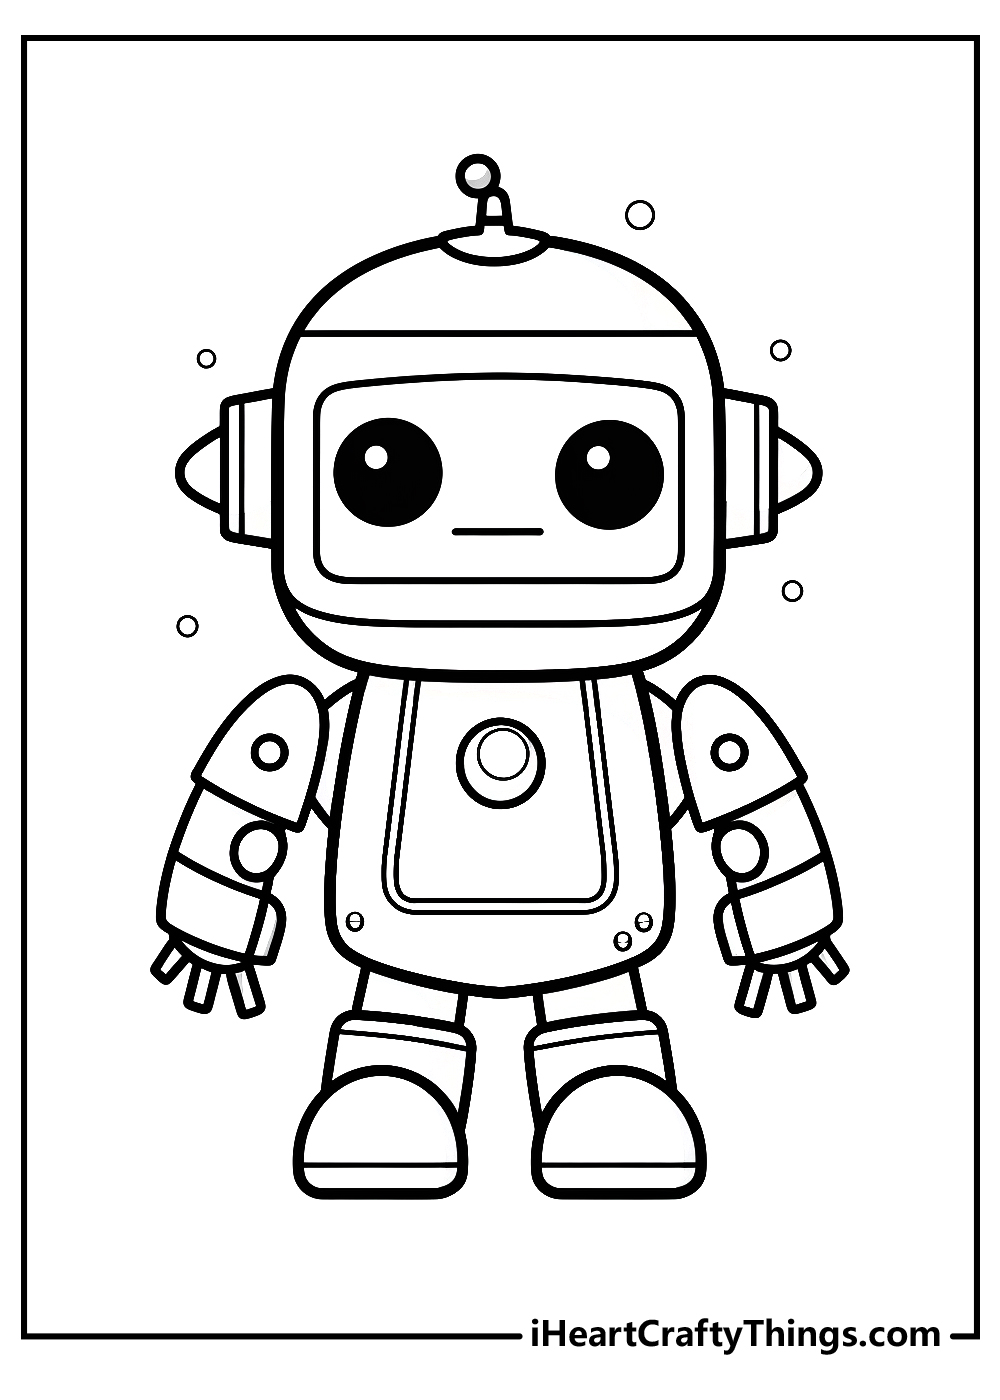 https://iheartcraftythings.com/wp-content/uploads/2022/04/Robot-Coloring-Pages2.jpg